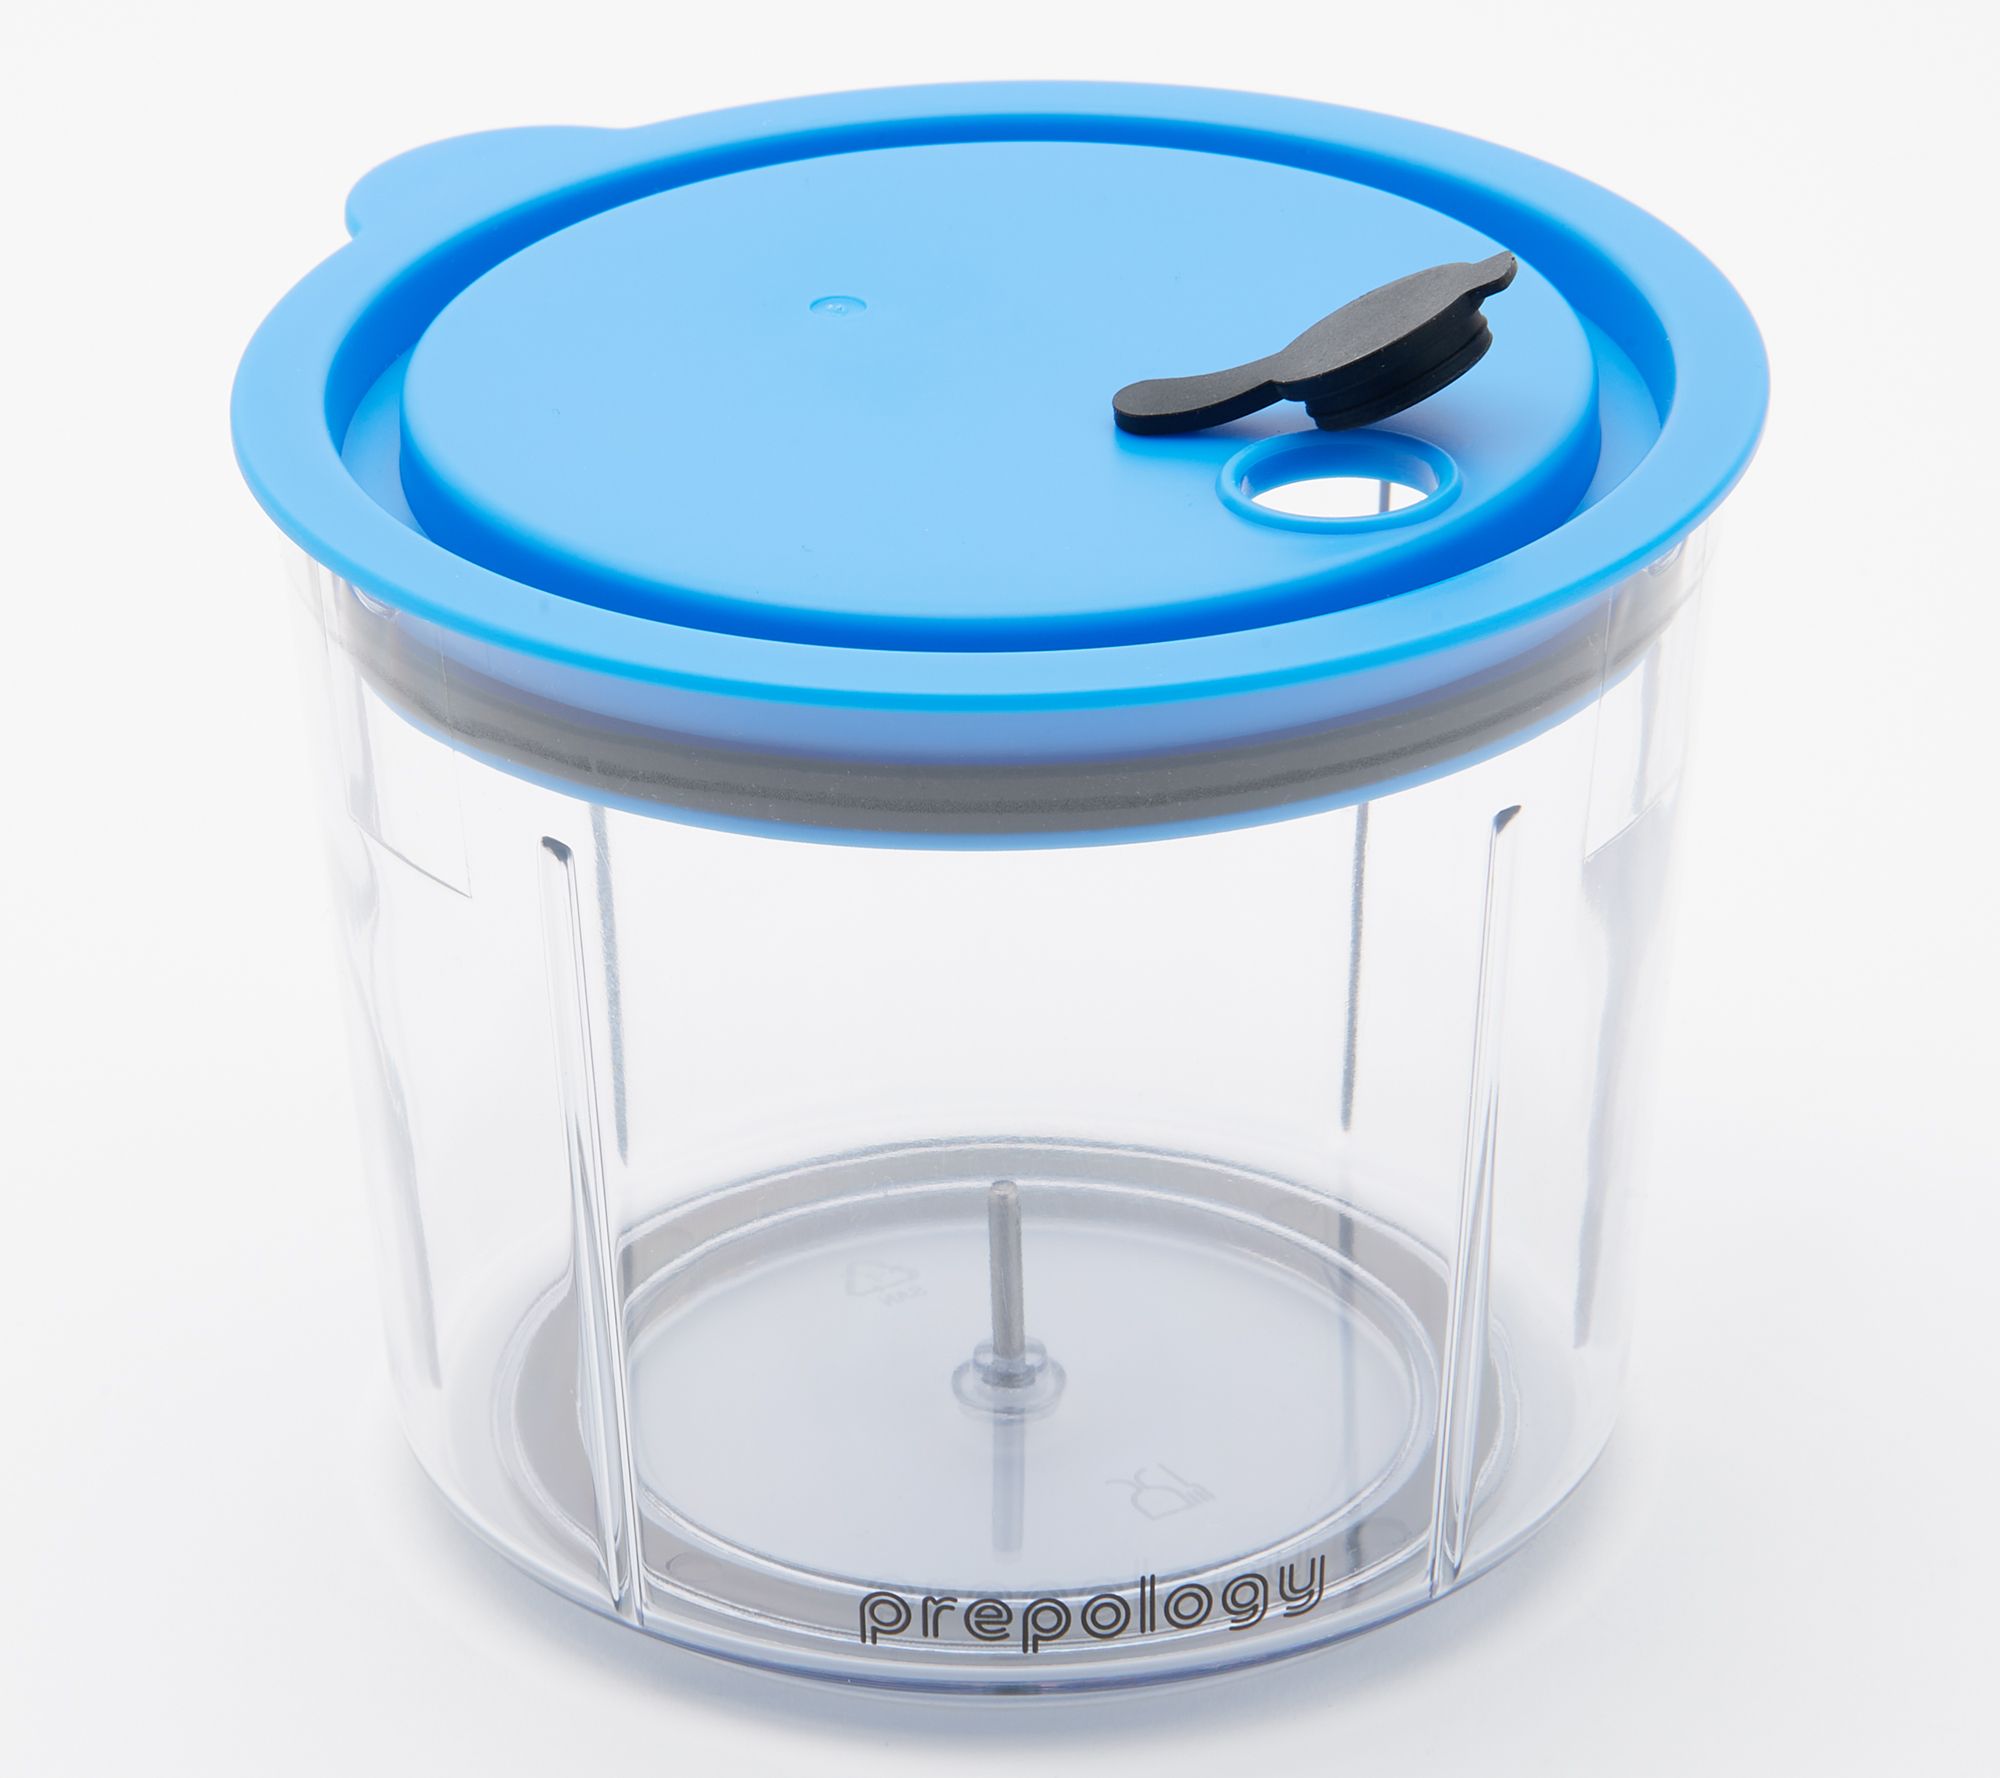 Prepology 4-Cup Press Chopper with Storage Lid